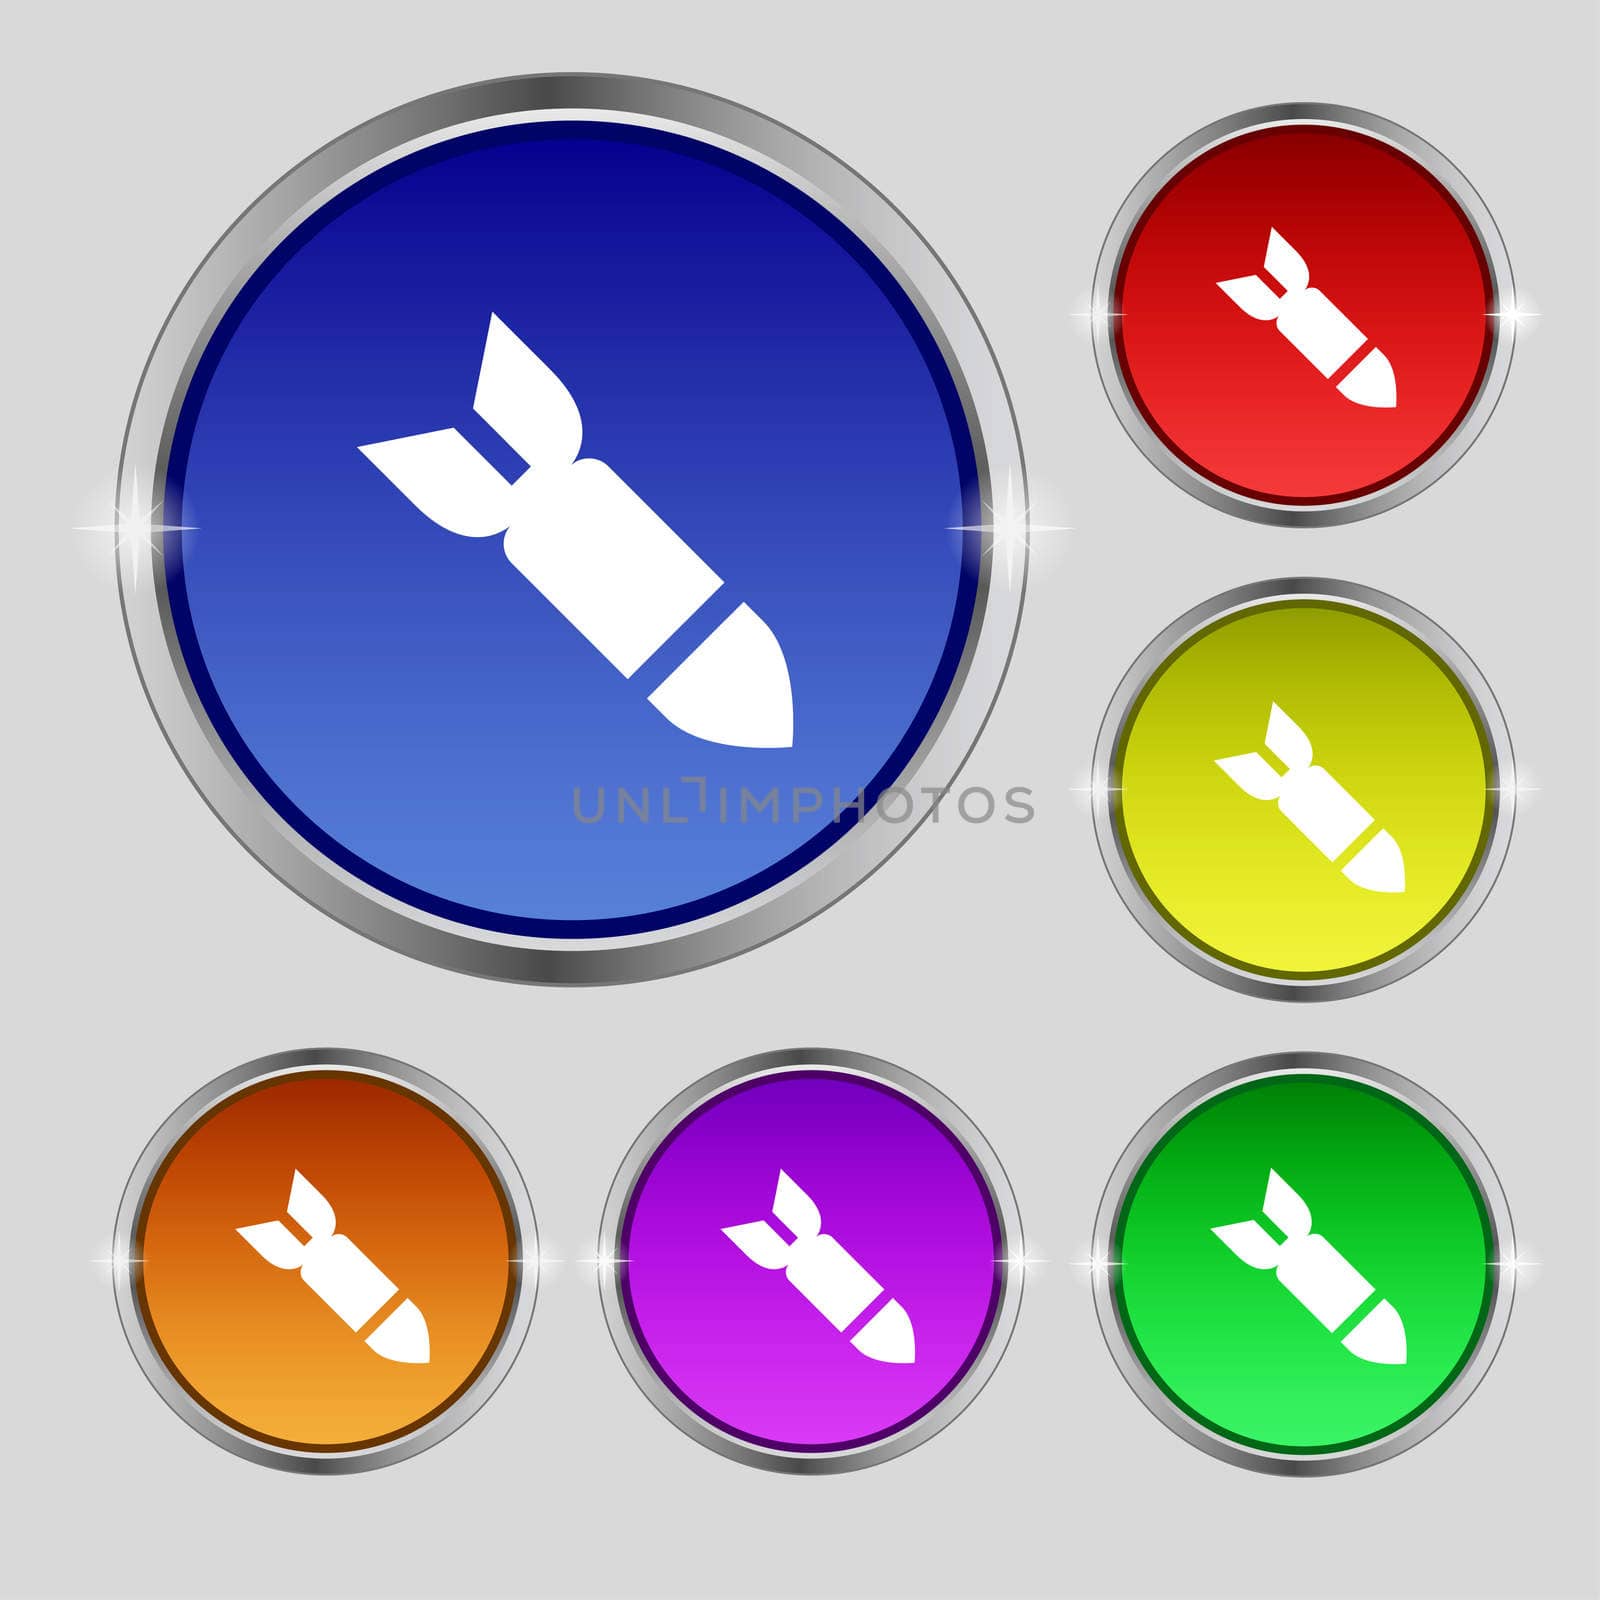 Missile,Rocket weapon icon sign. Round symbol on bright colourful buttons.  by serhii_lohvyniuk